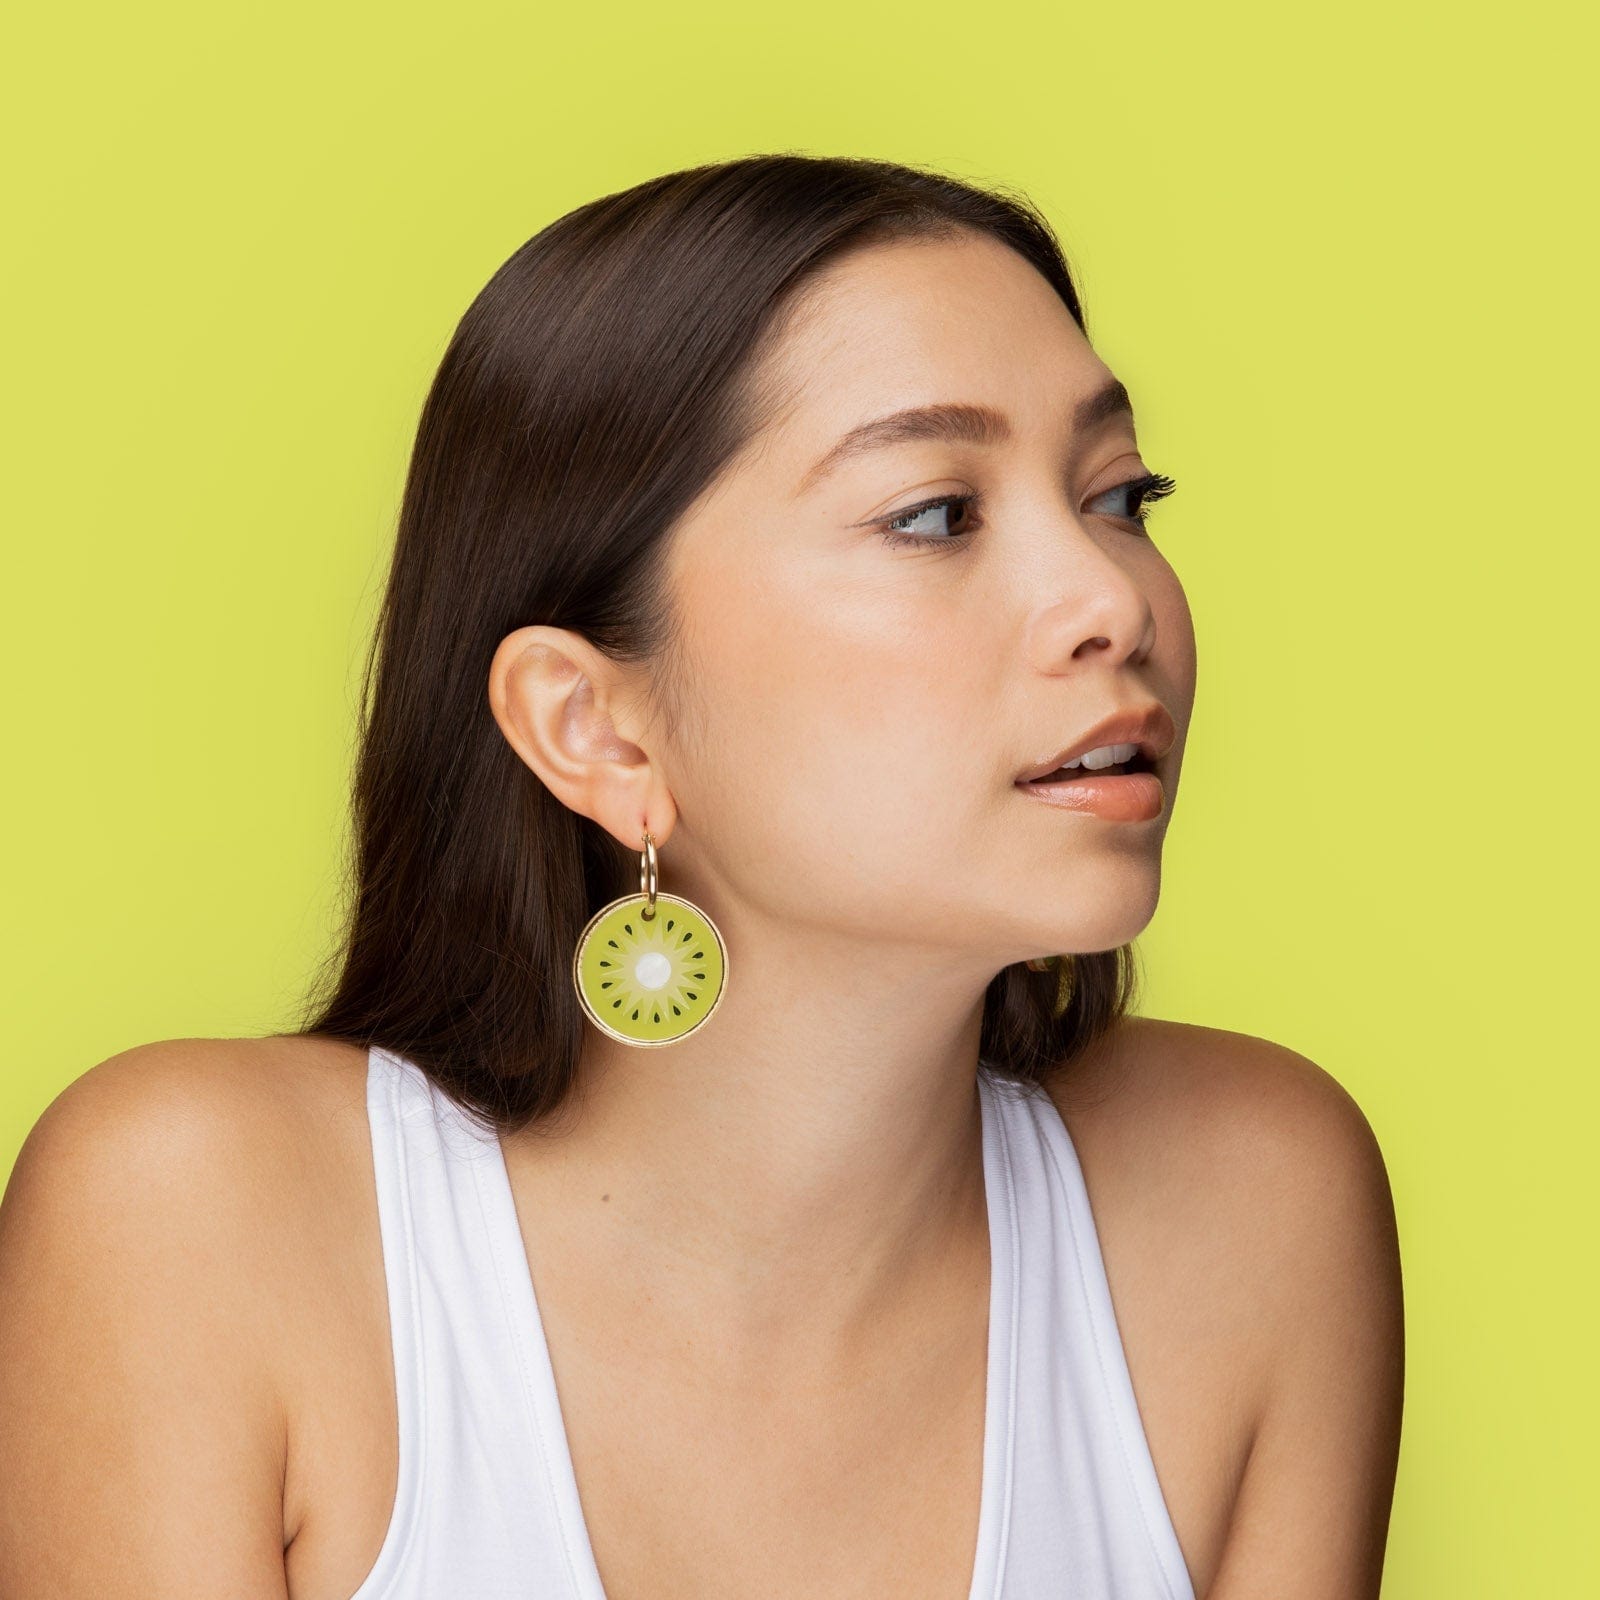 Kiwi earrings with gold-filled hoops 